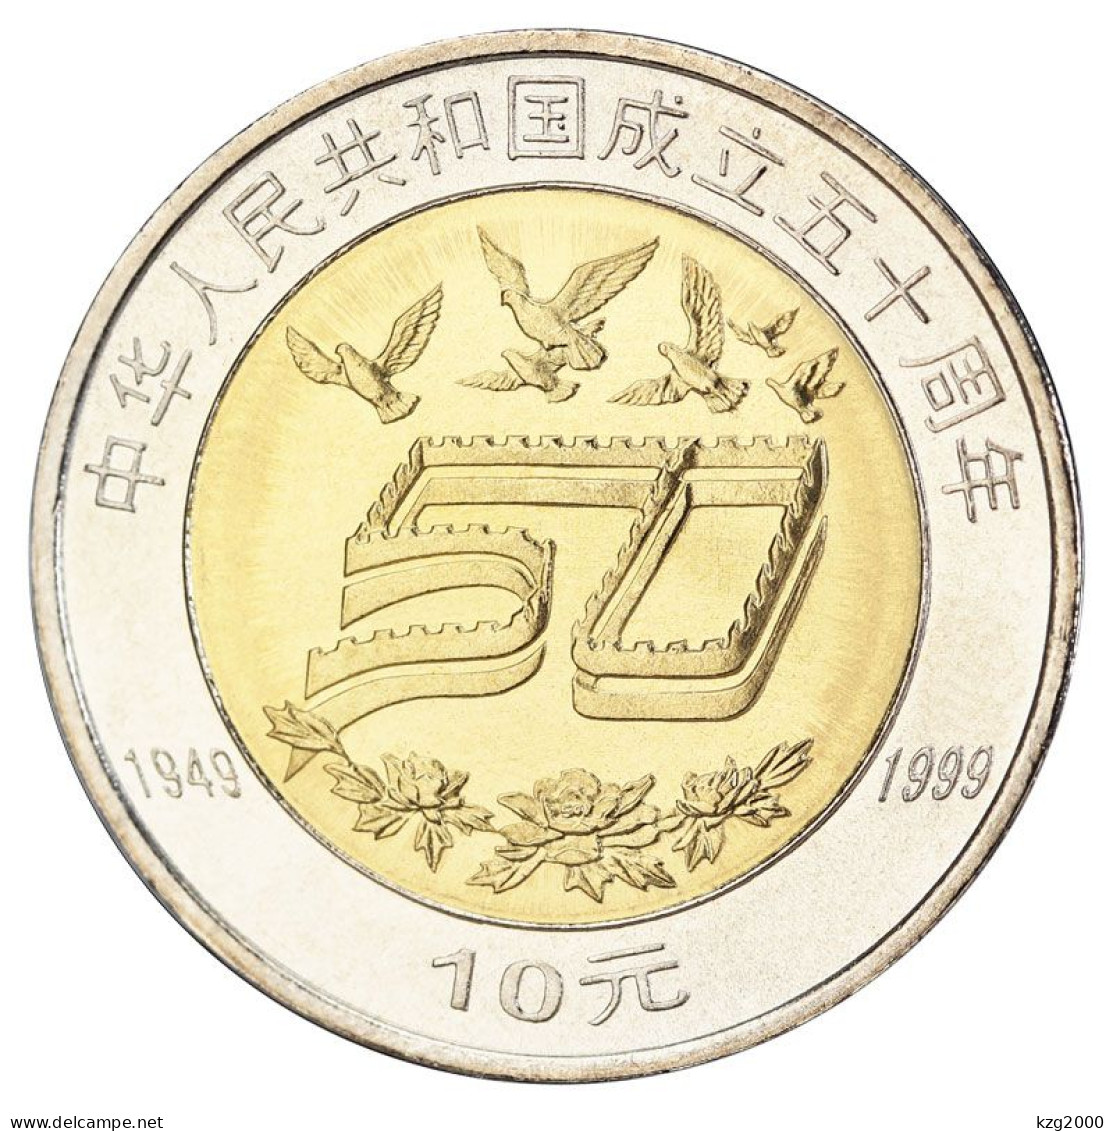 China 10 Yuan Coins 1999 PRC Found 50TH Anniversary COMM Coin 25.5mm Yellow White Copper Alloy Coin 1 Pcs - Cina